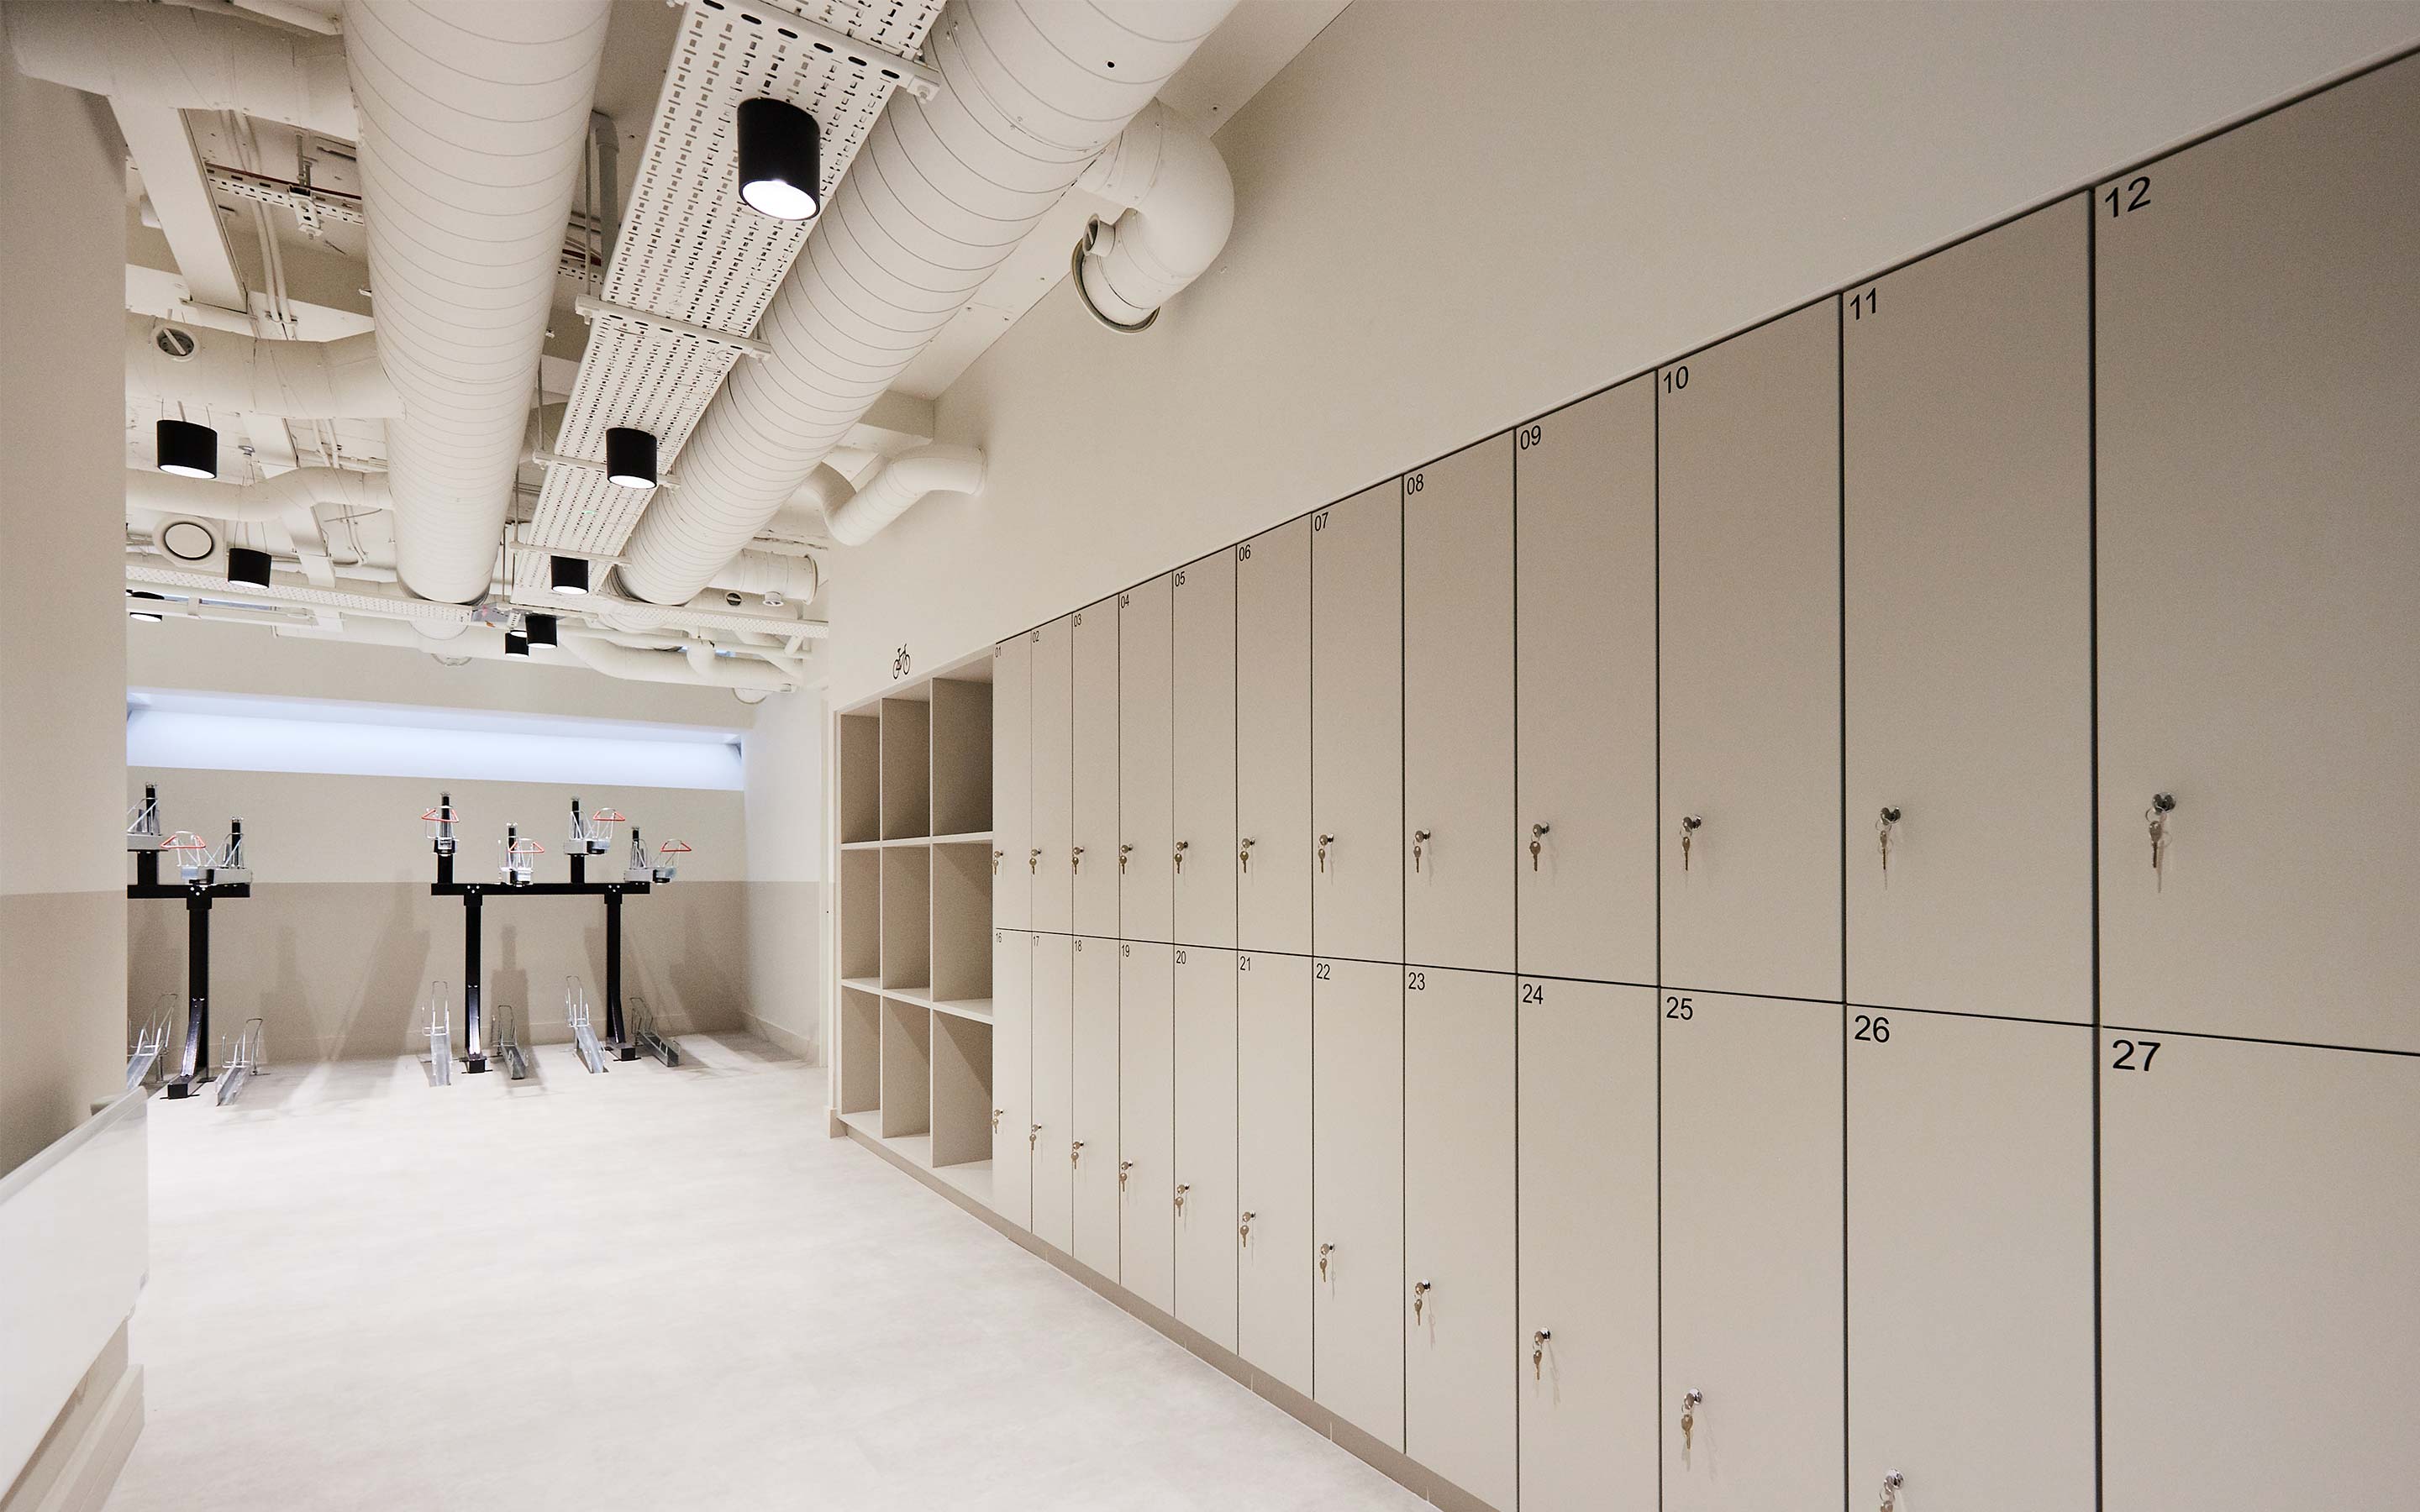 End-of-trip services such as lockers and bike storage in a contemporary office interior design